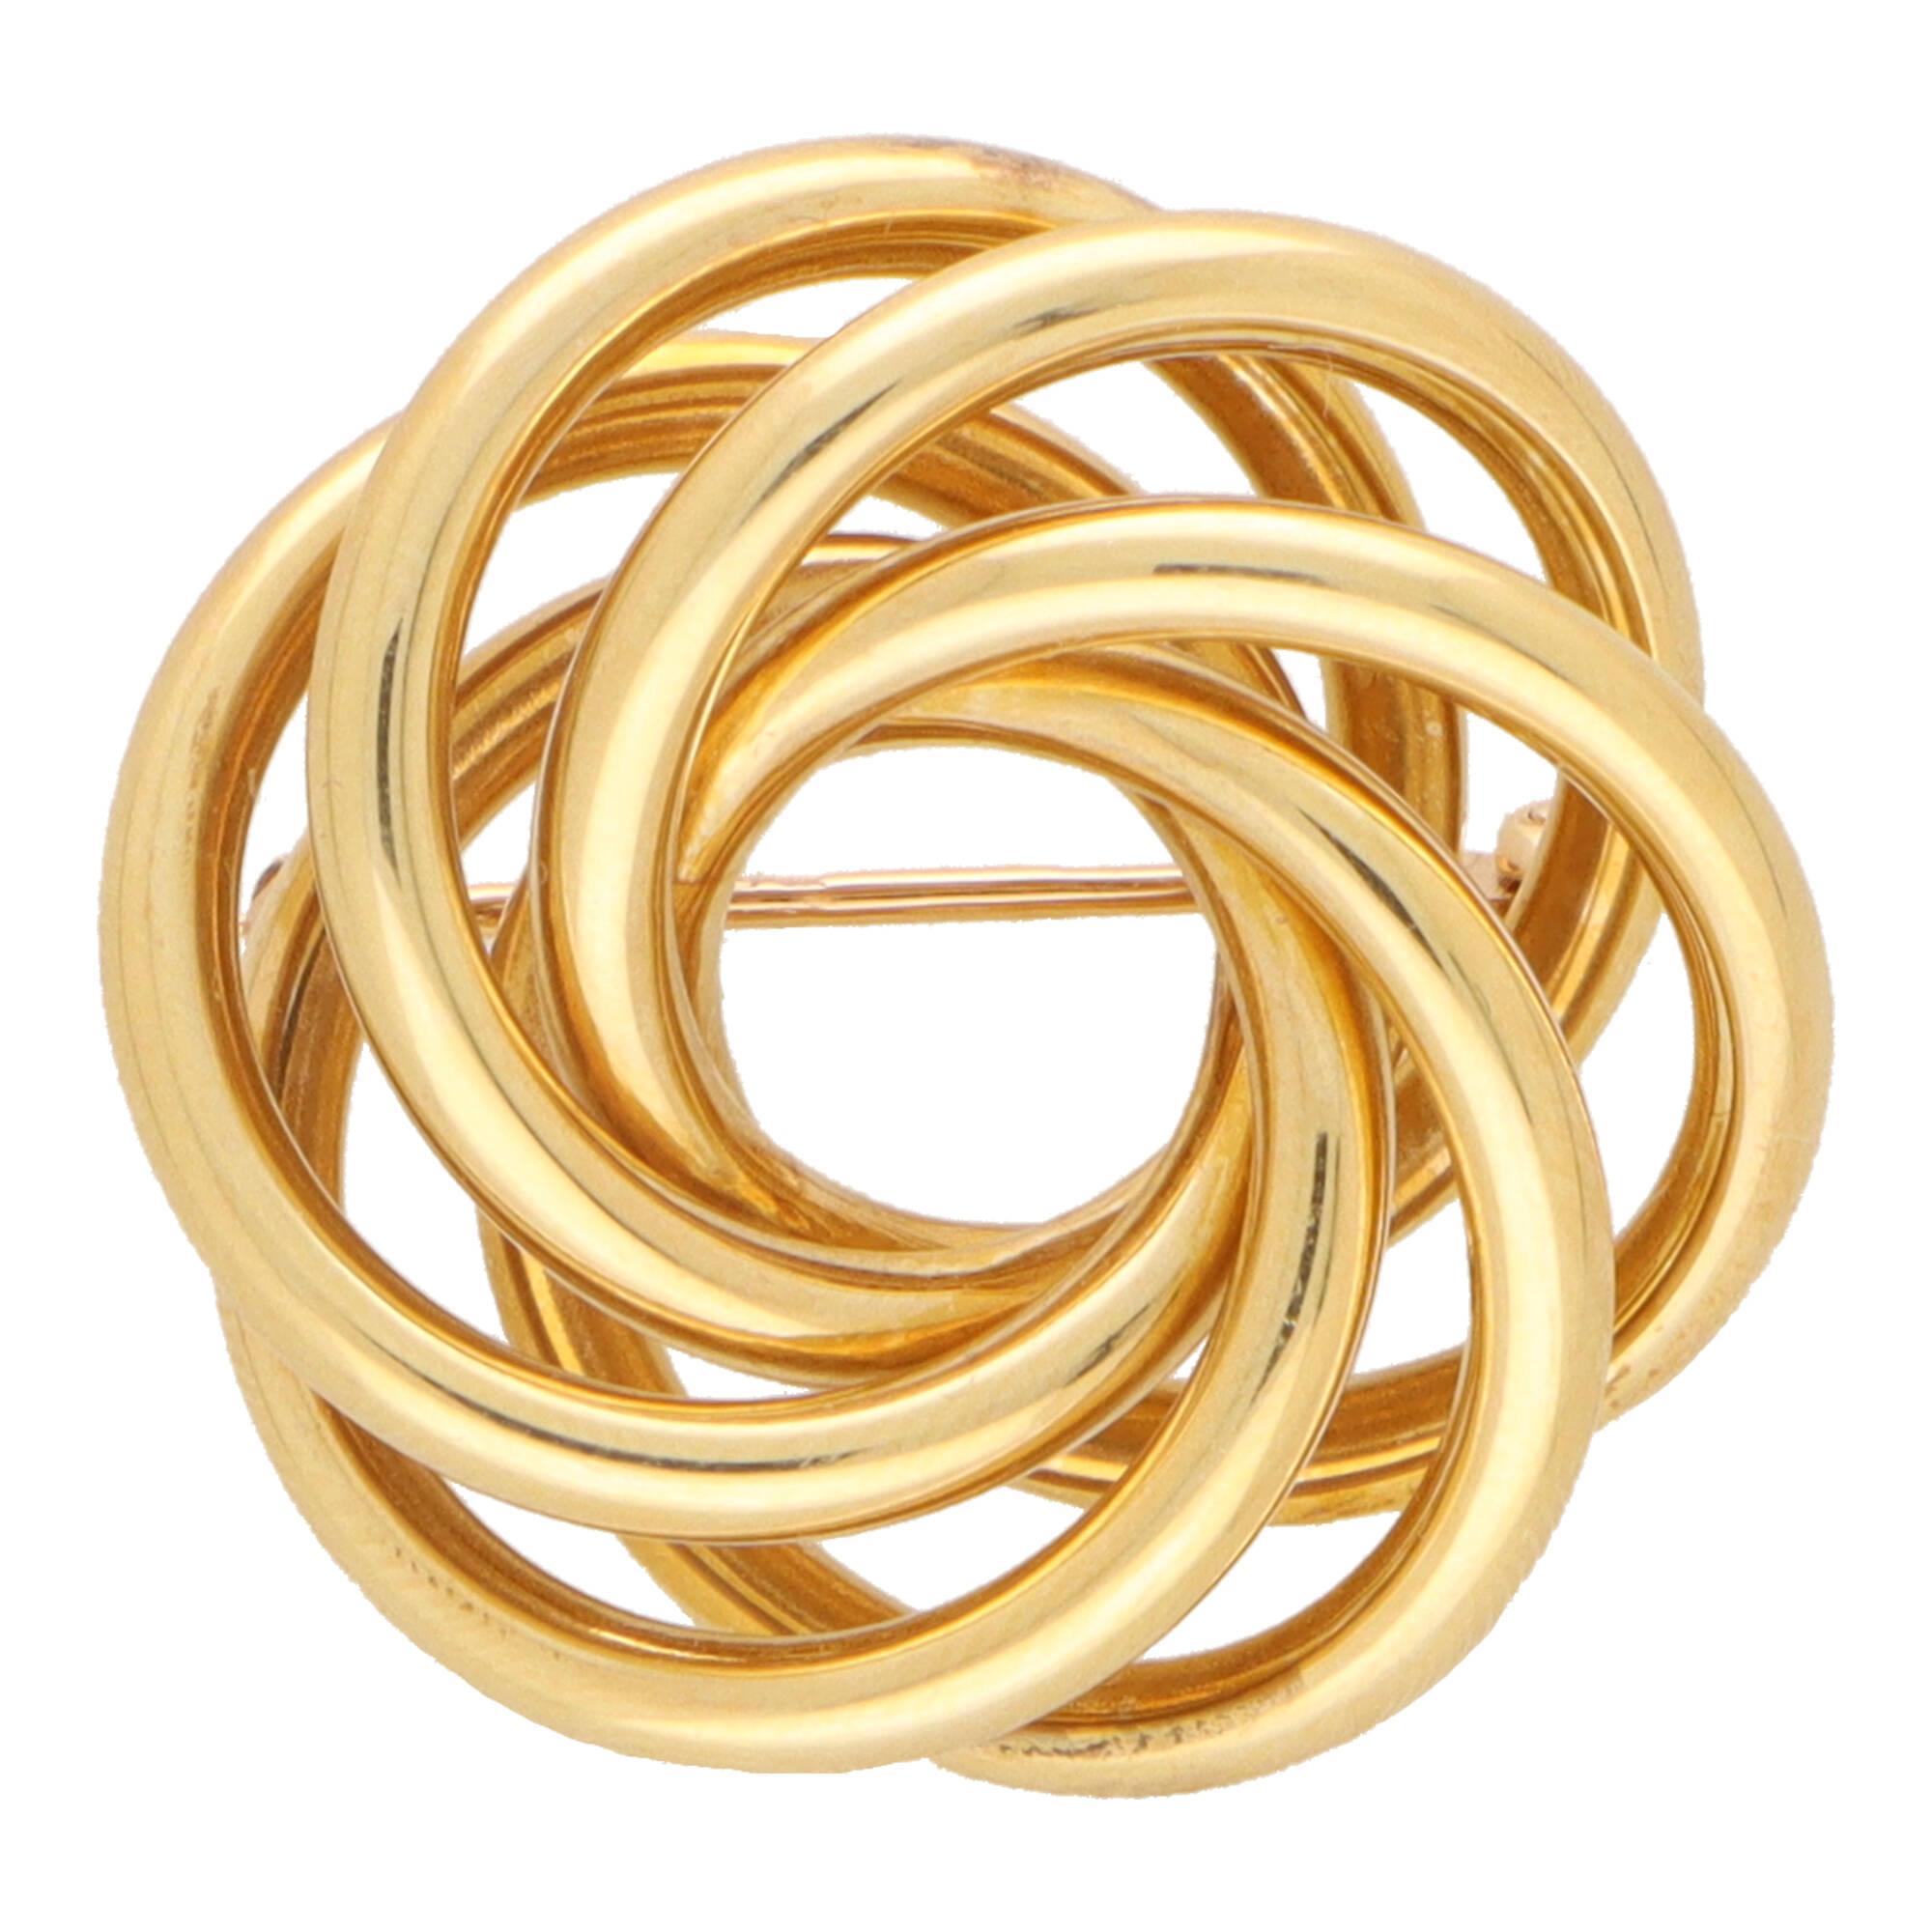 Vintage Tiffany & Co. Swirl Brooch in 14k Yellow Gold In Excellent Condition For Sale In London, GB